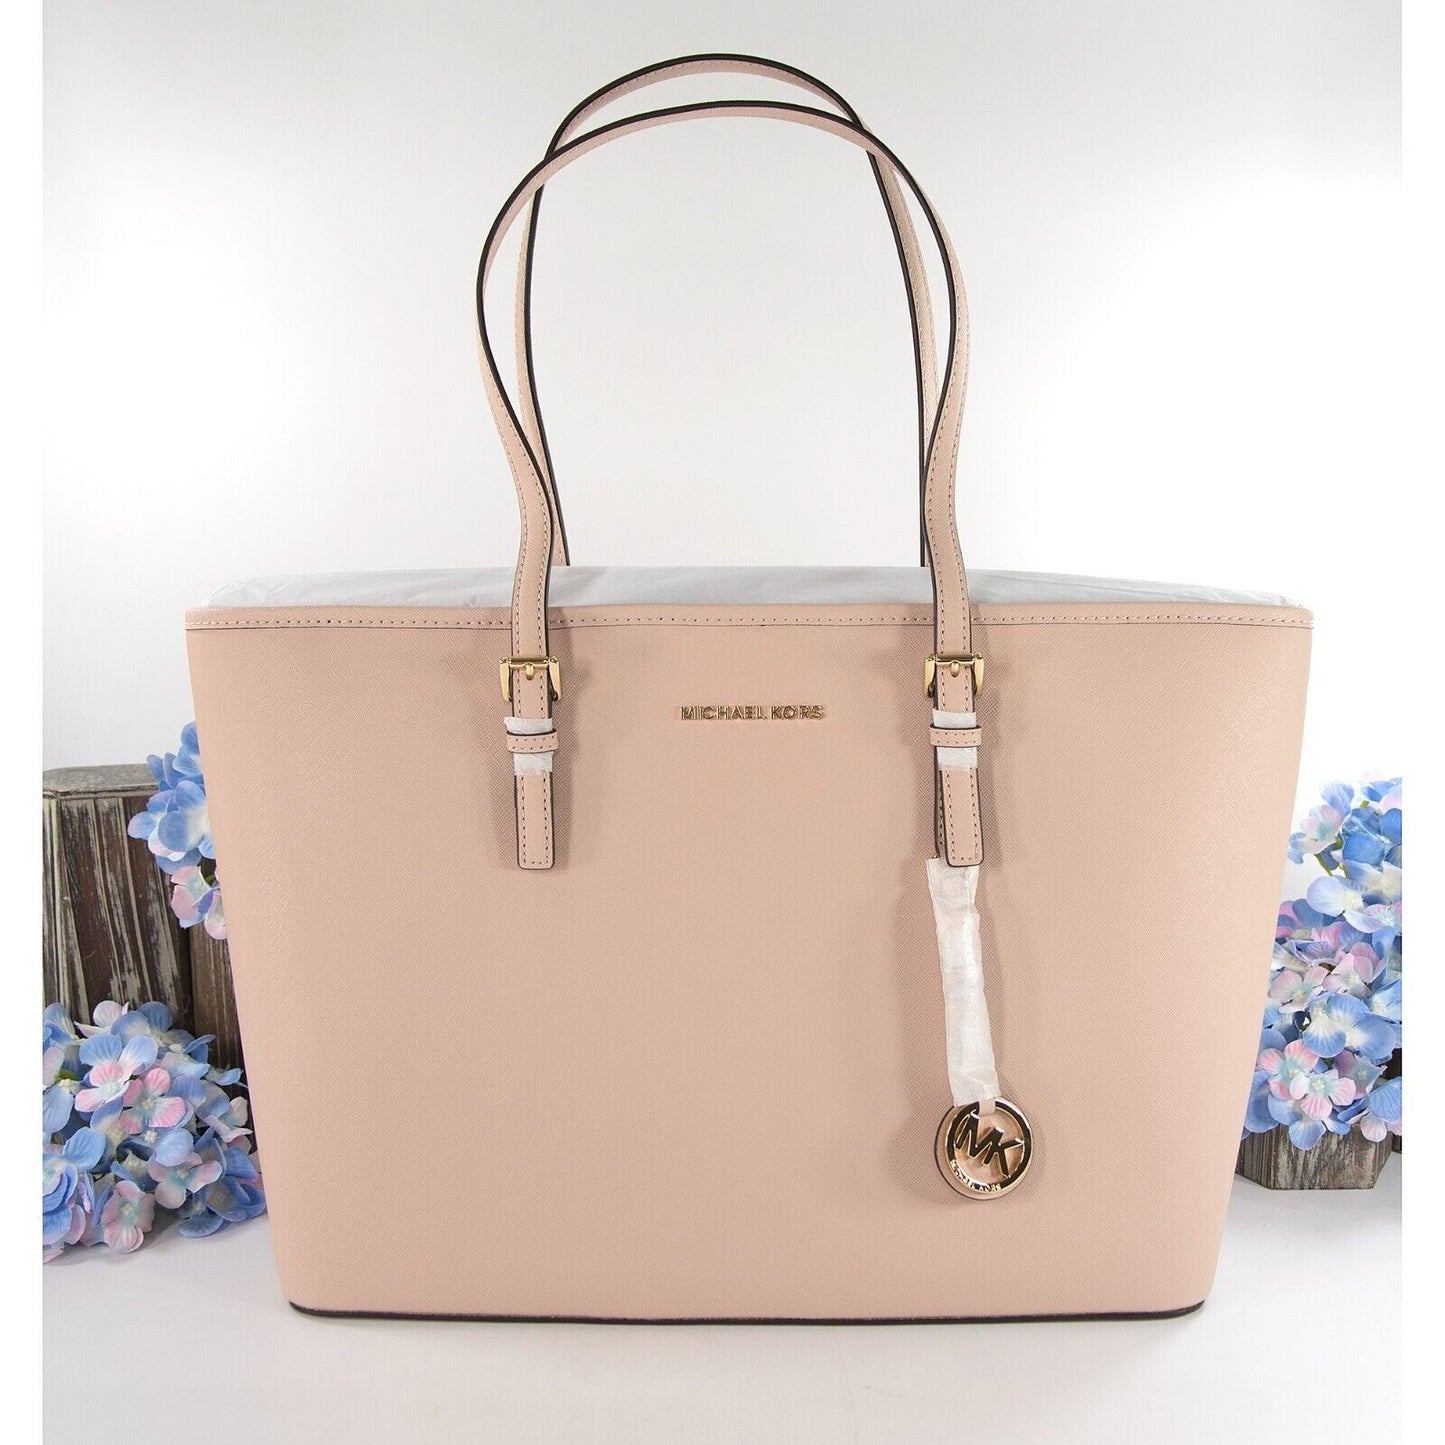 Michael Kors Soft Pink Saffiano Leather Multifunction Travel Tote Bag NWT